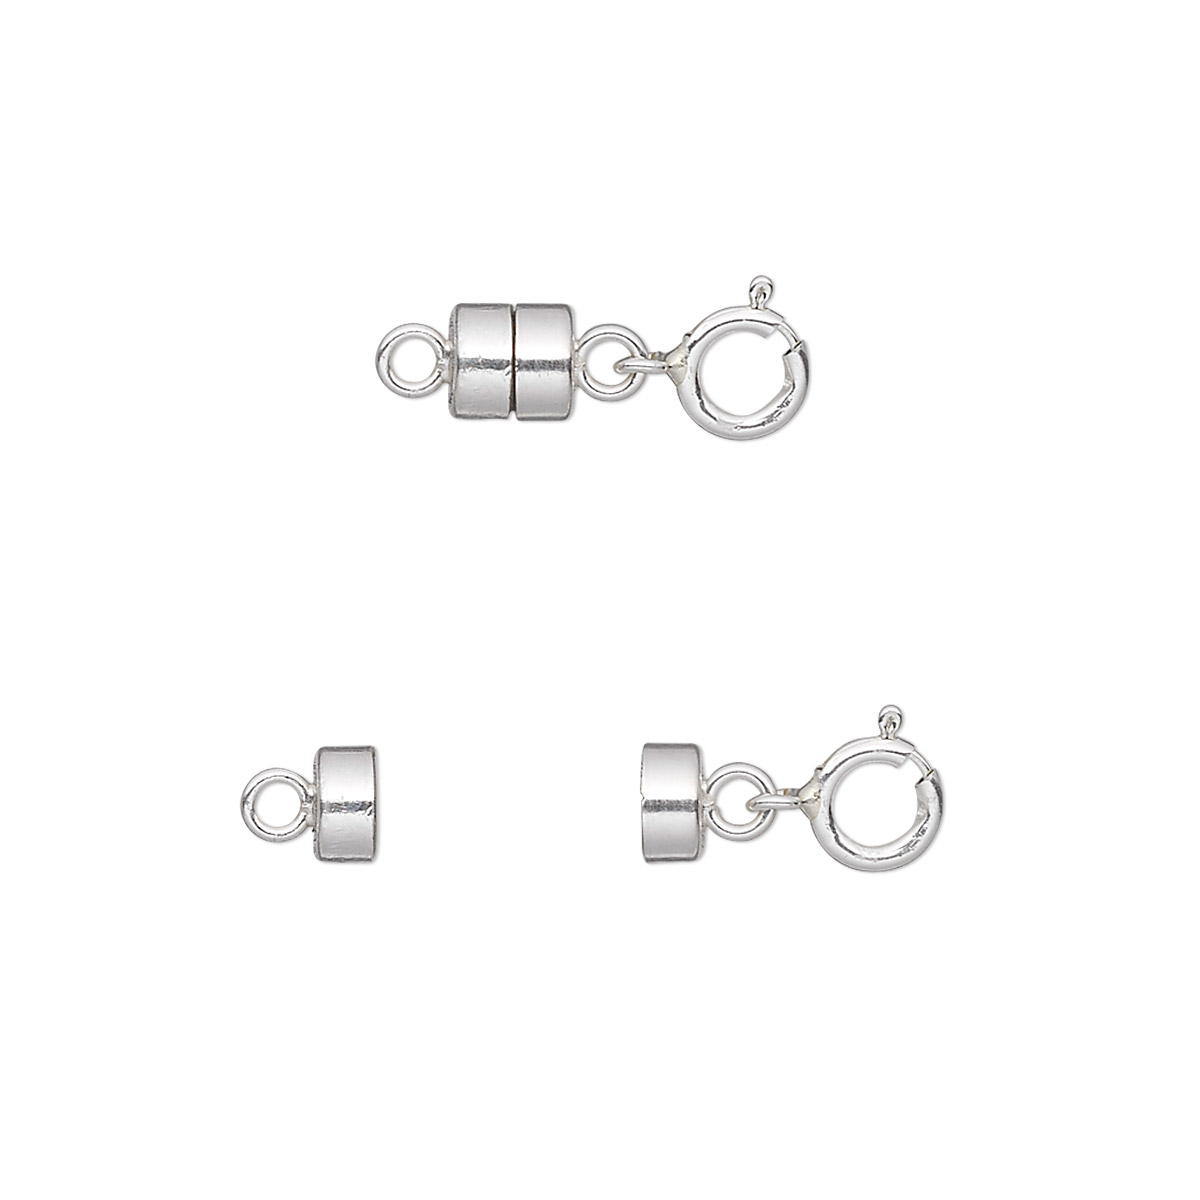 Clasp, magnetic converter, sterling silver, 4.5x4.5mm barrel and 5mm ...